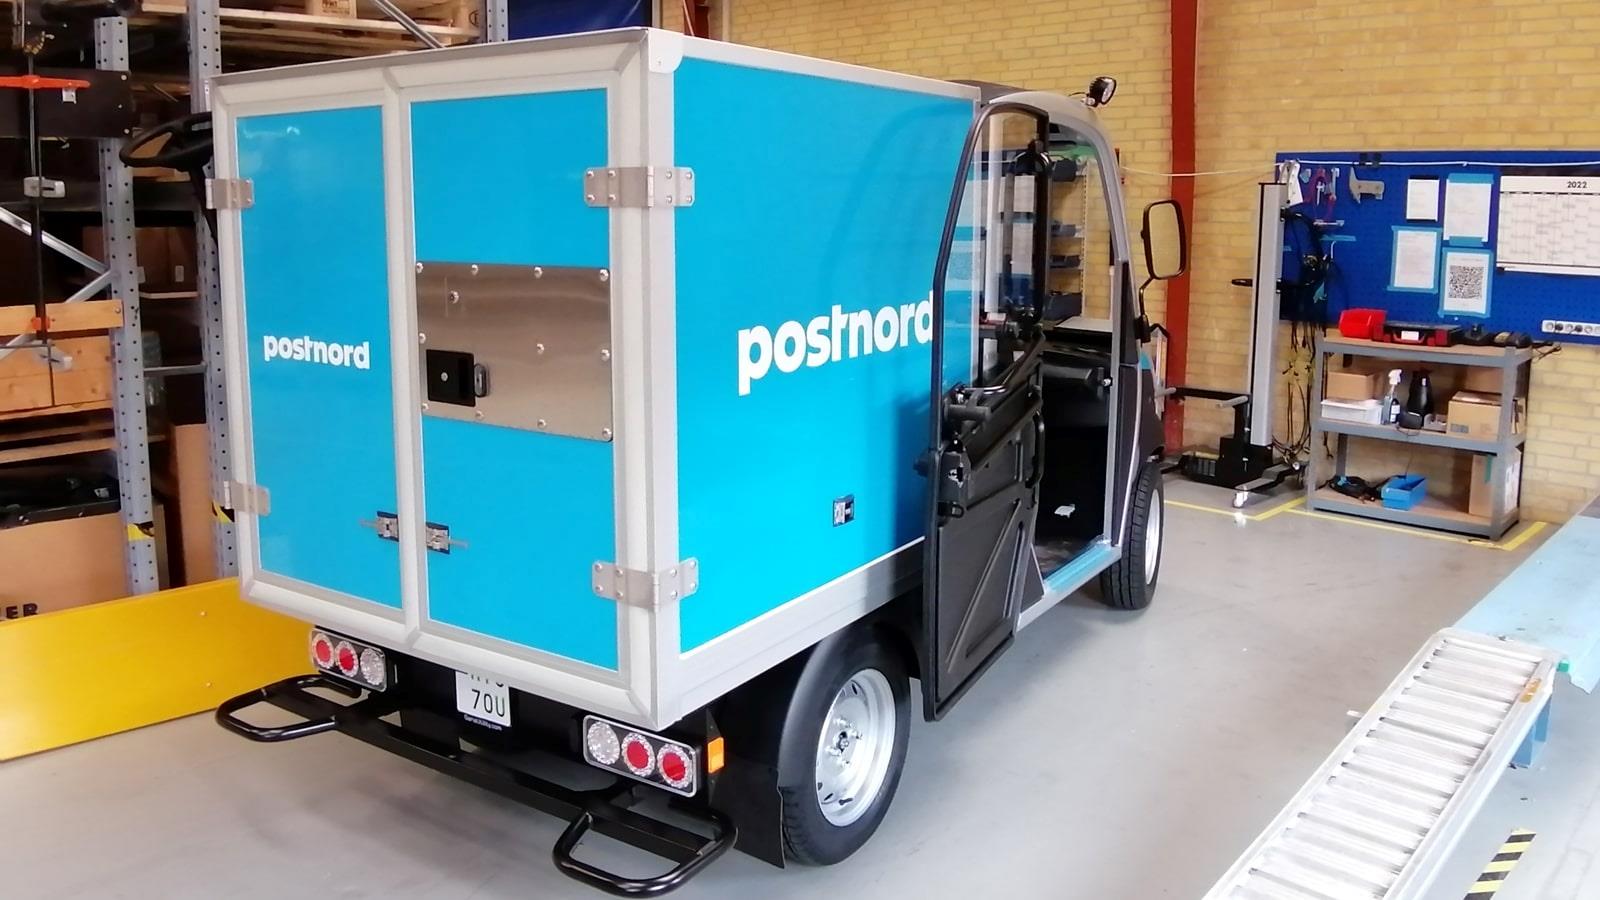  Small blue electric car produced by Garia for Postnord